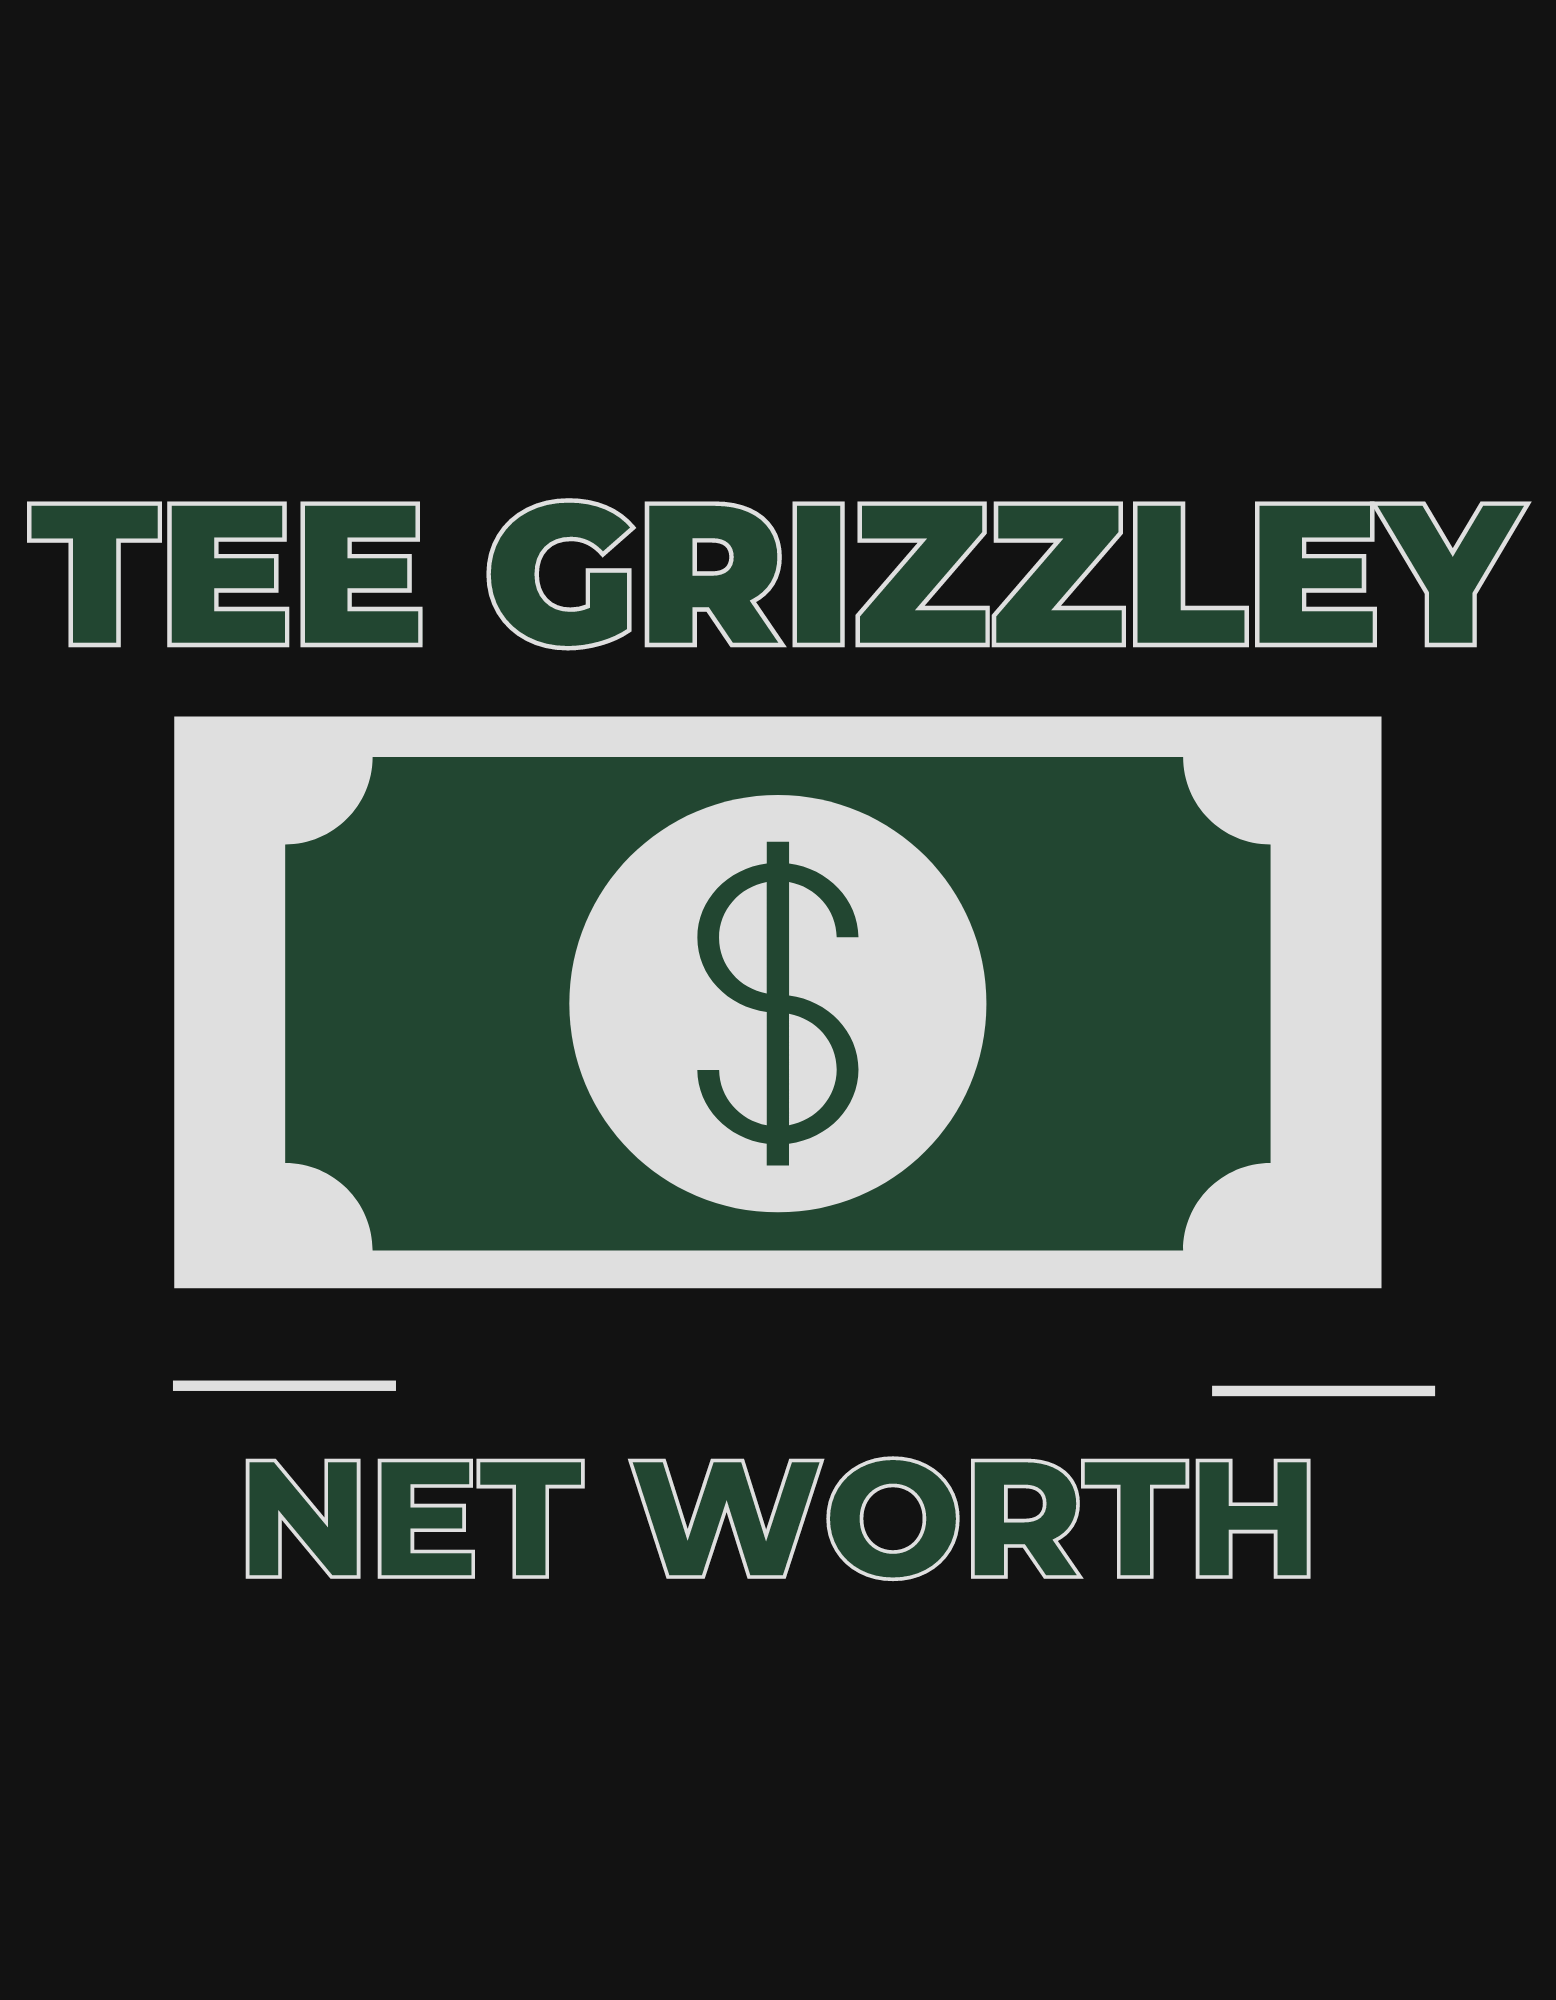 Tee Grizzley's net worth and how he amassed his wealth.